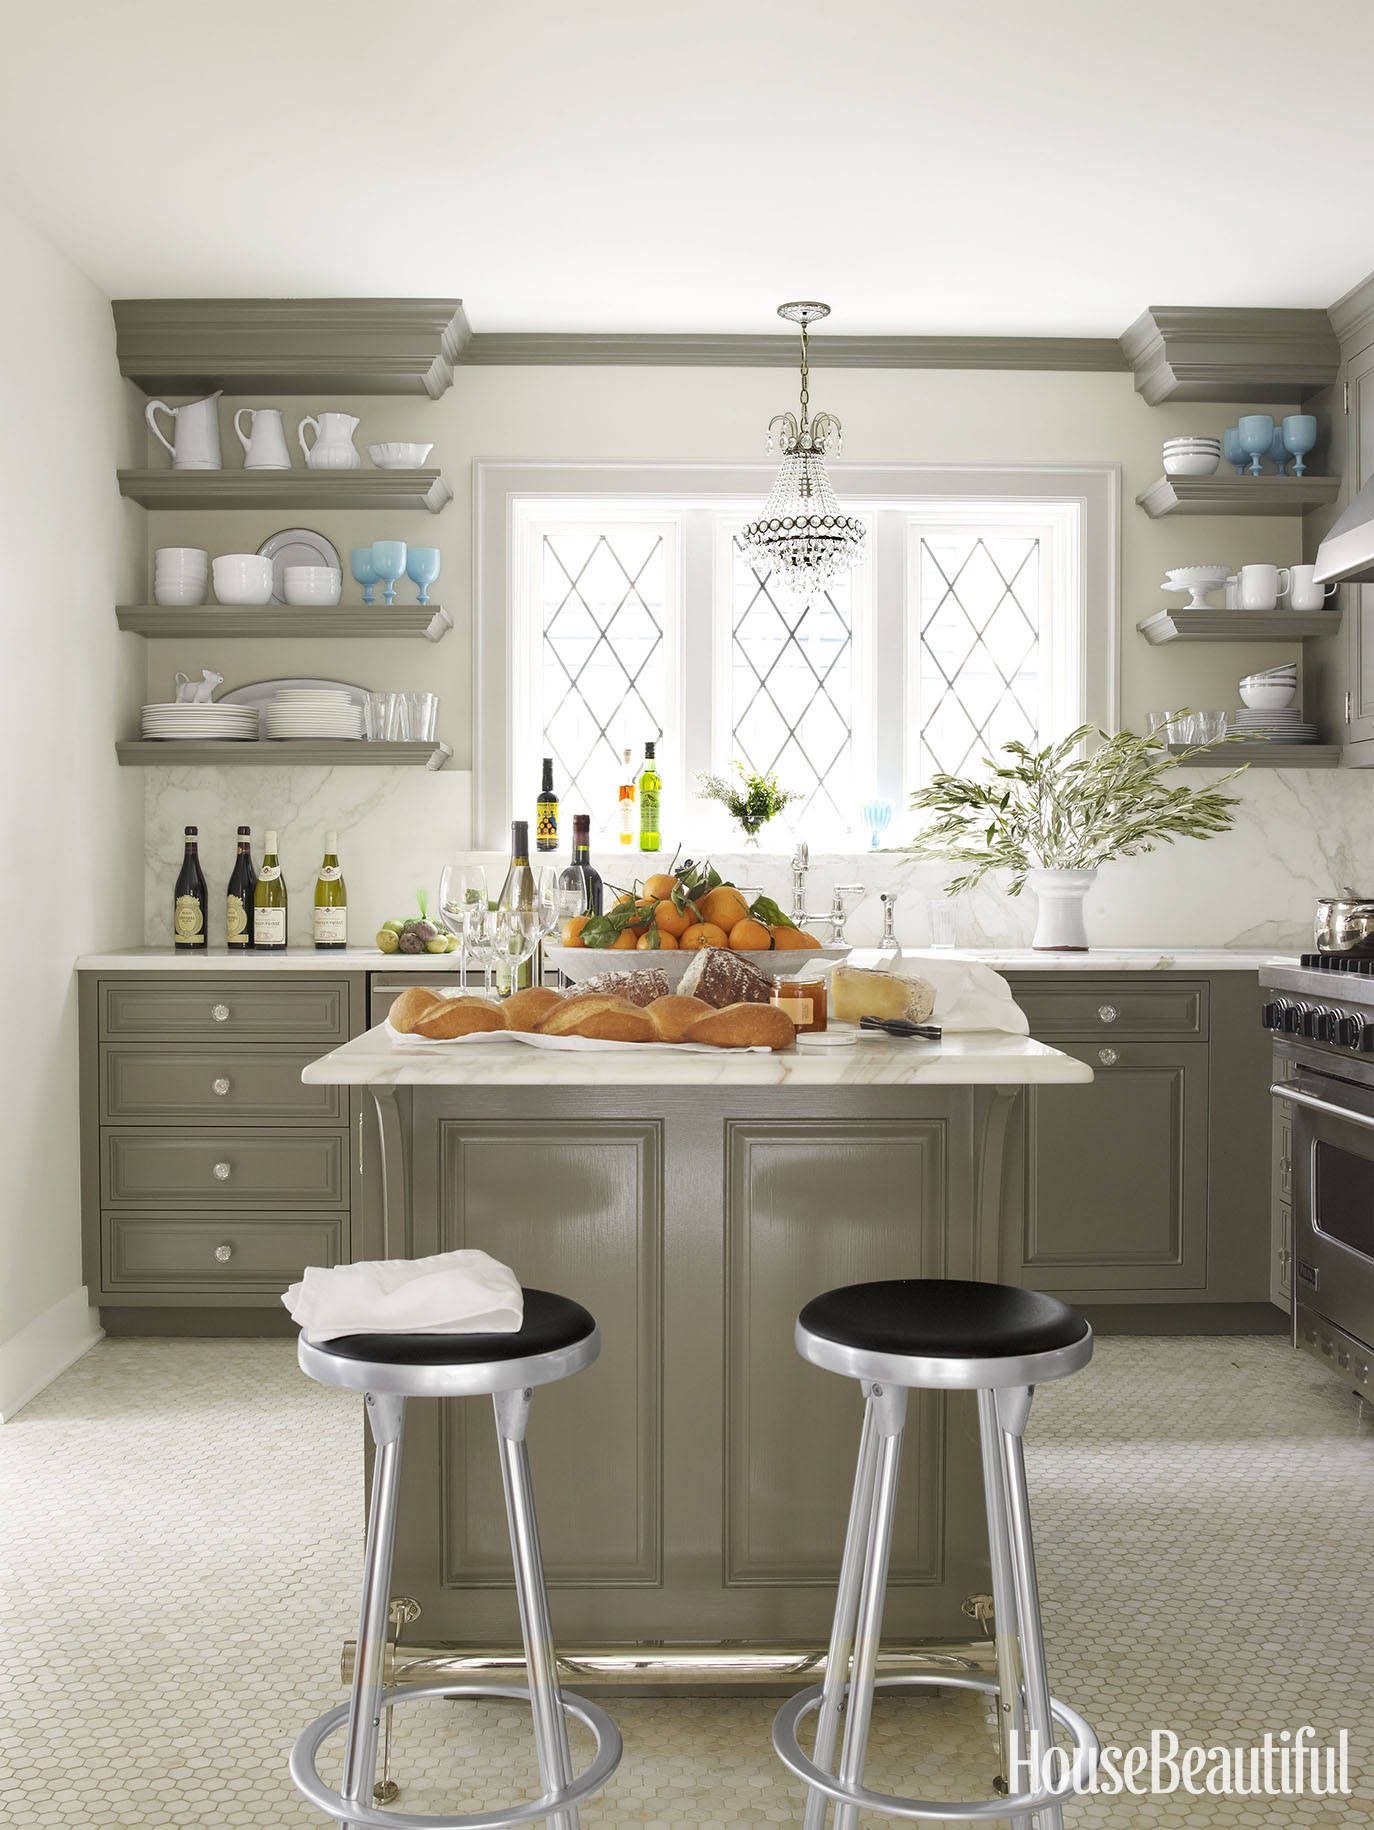 15 Modern Kitchen Cabinet Ideas to Replace Your Open Shelves